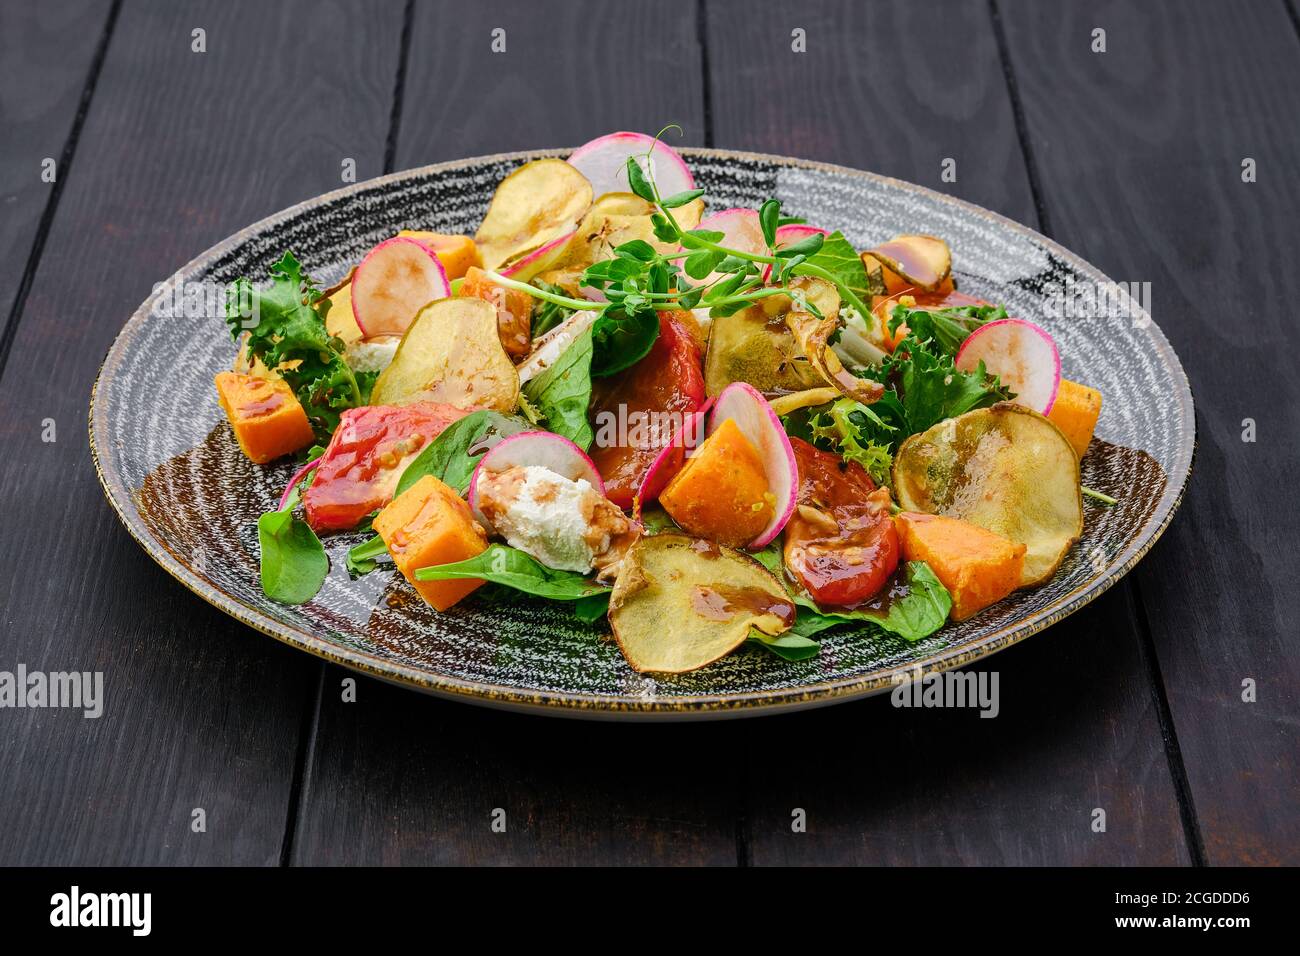 Portion of salad with soft cheese, radish, pear, pumpkin and sun dried tomato Stock Photo